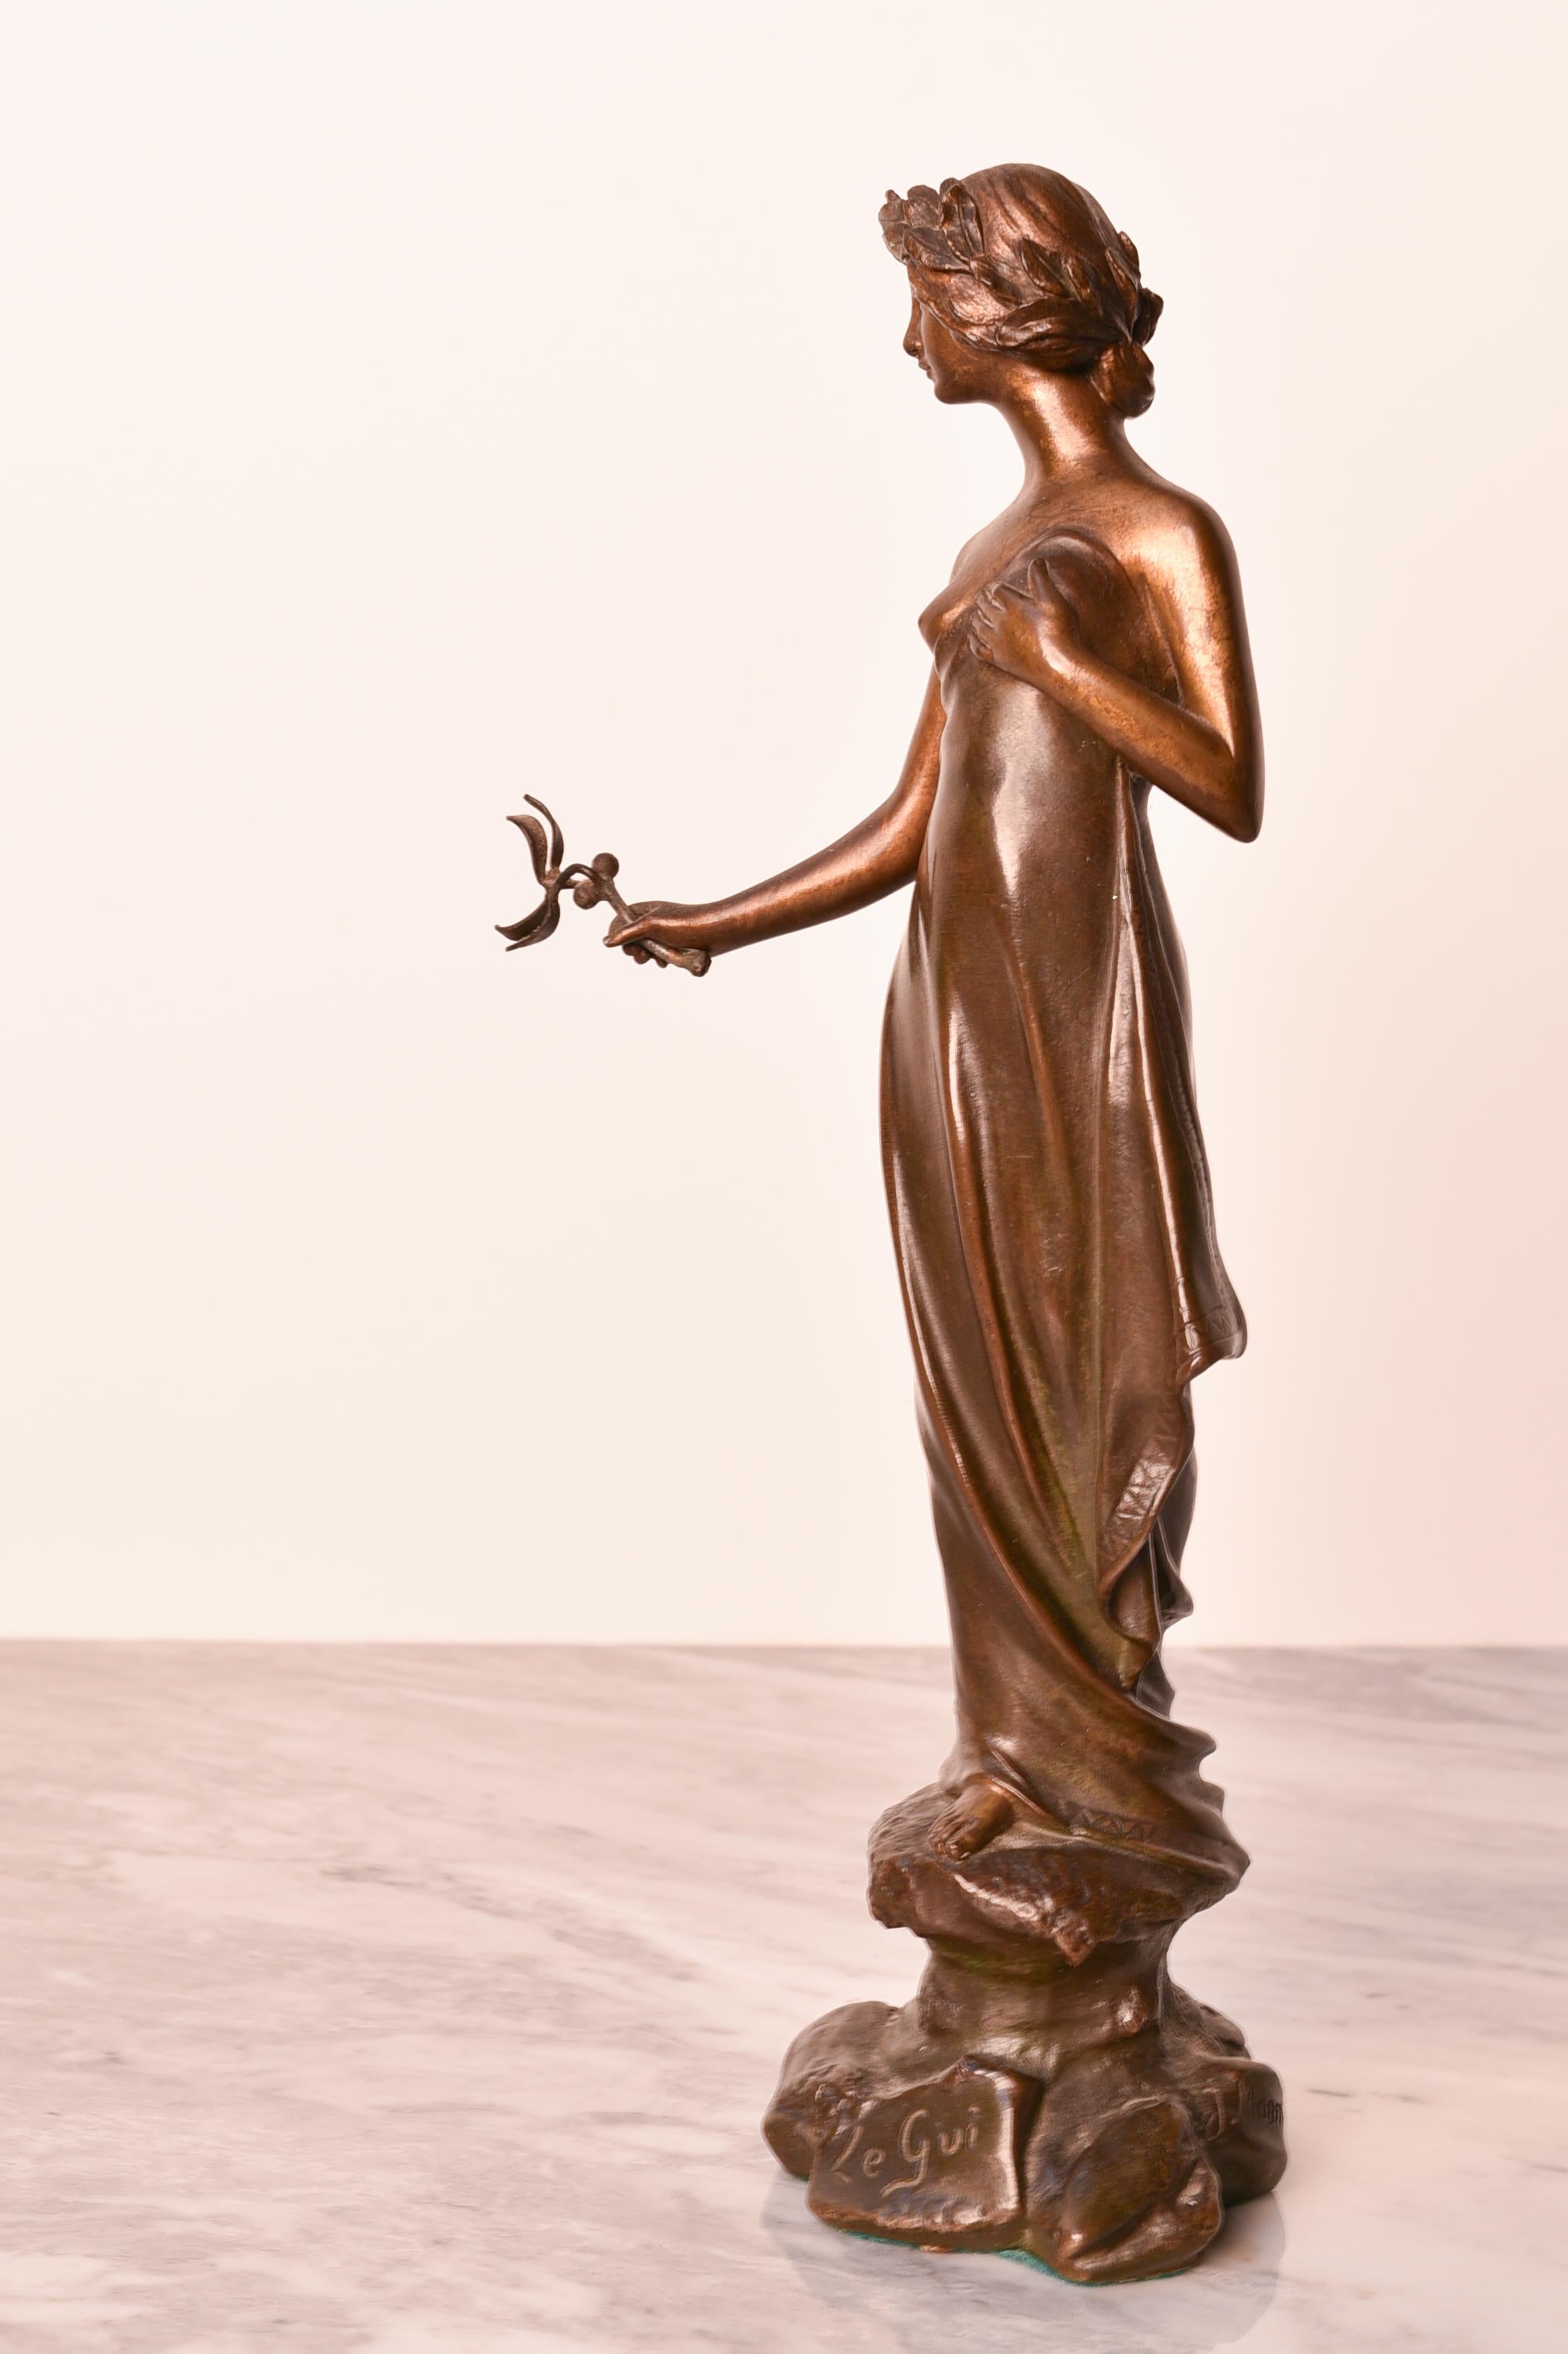 Art nouveau bronze statue, signed by the artist Joan Fortuny Monmany (1866-1918). The statue also bears a foundry mark and also the name of the piece of art (Le Gui = the misletoe) was cast in the bronze. 